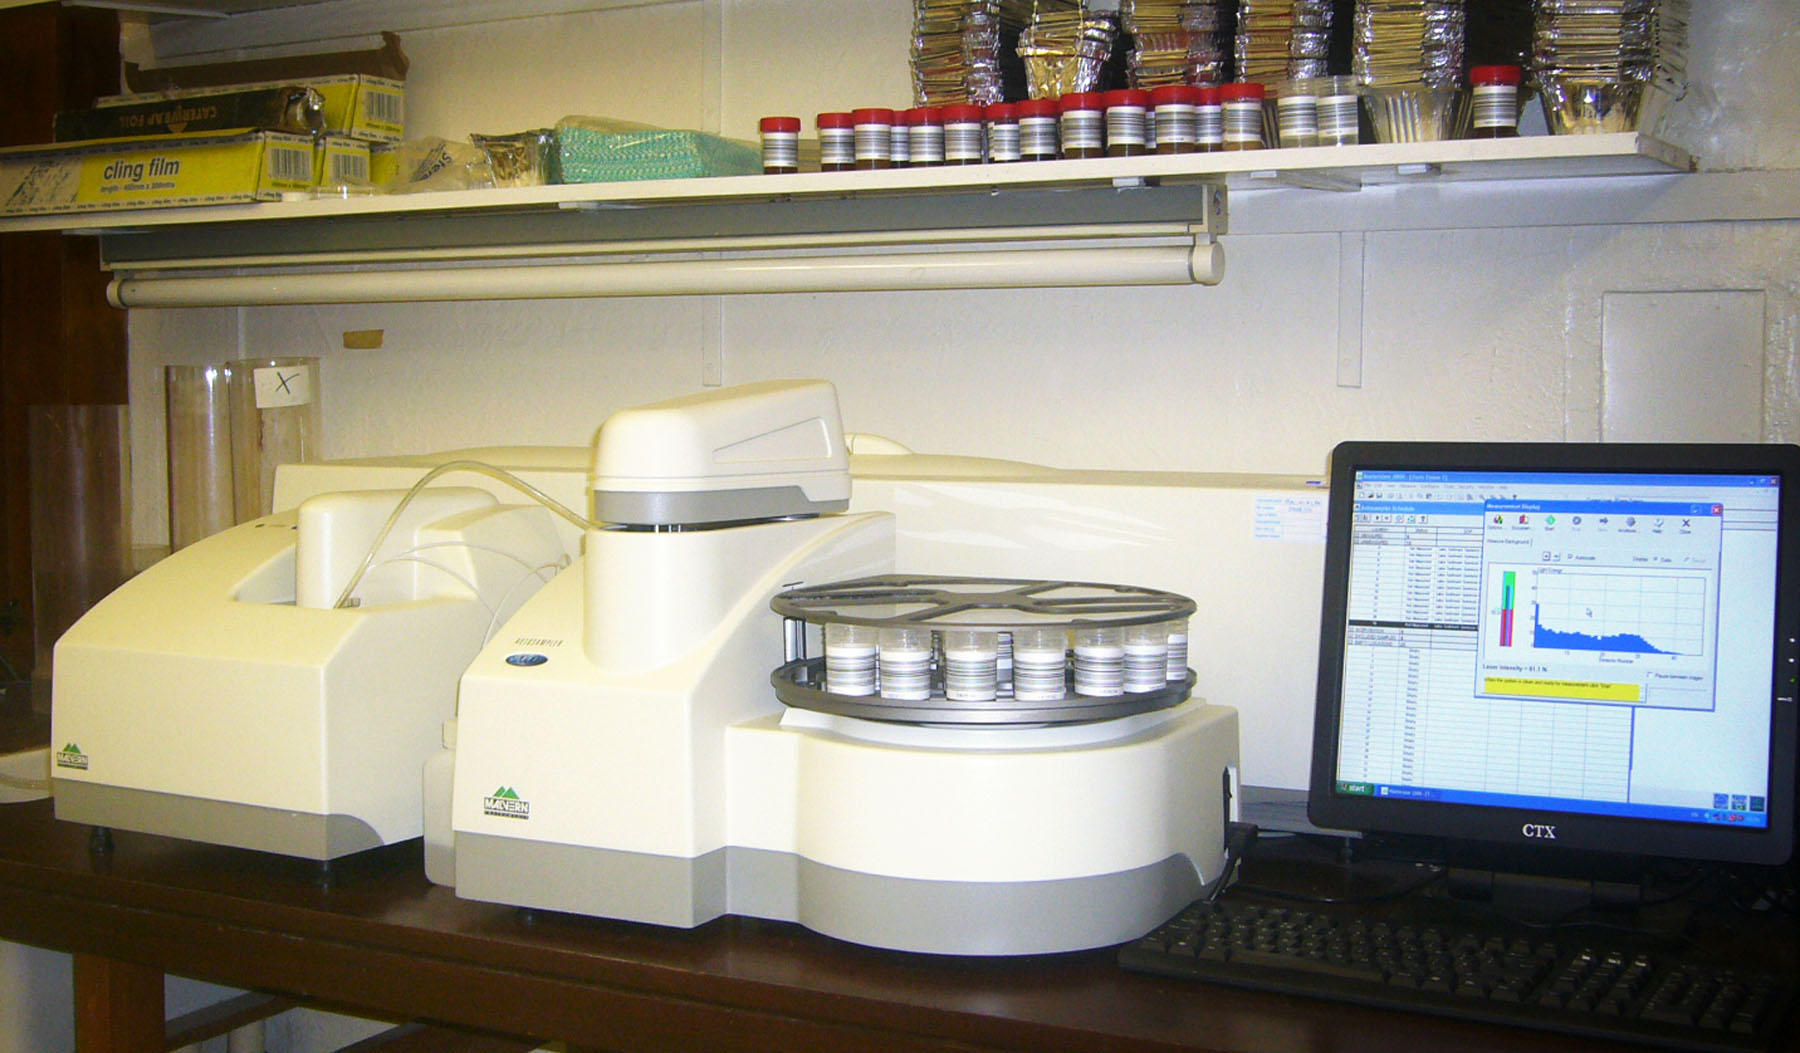 The Mastersizer 2000 equipped with Autosampler in the School of Natural Sciences at Trinity College Dublin (Ireland)